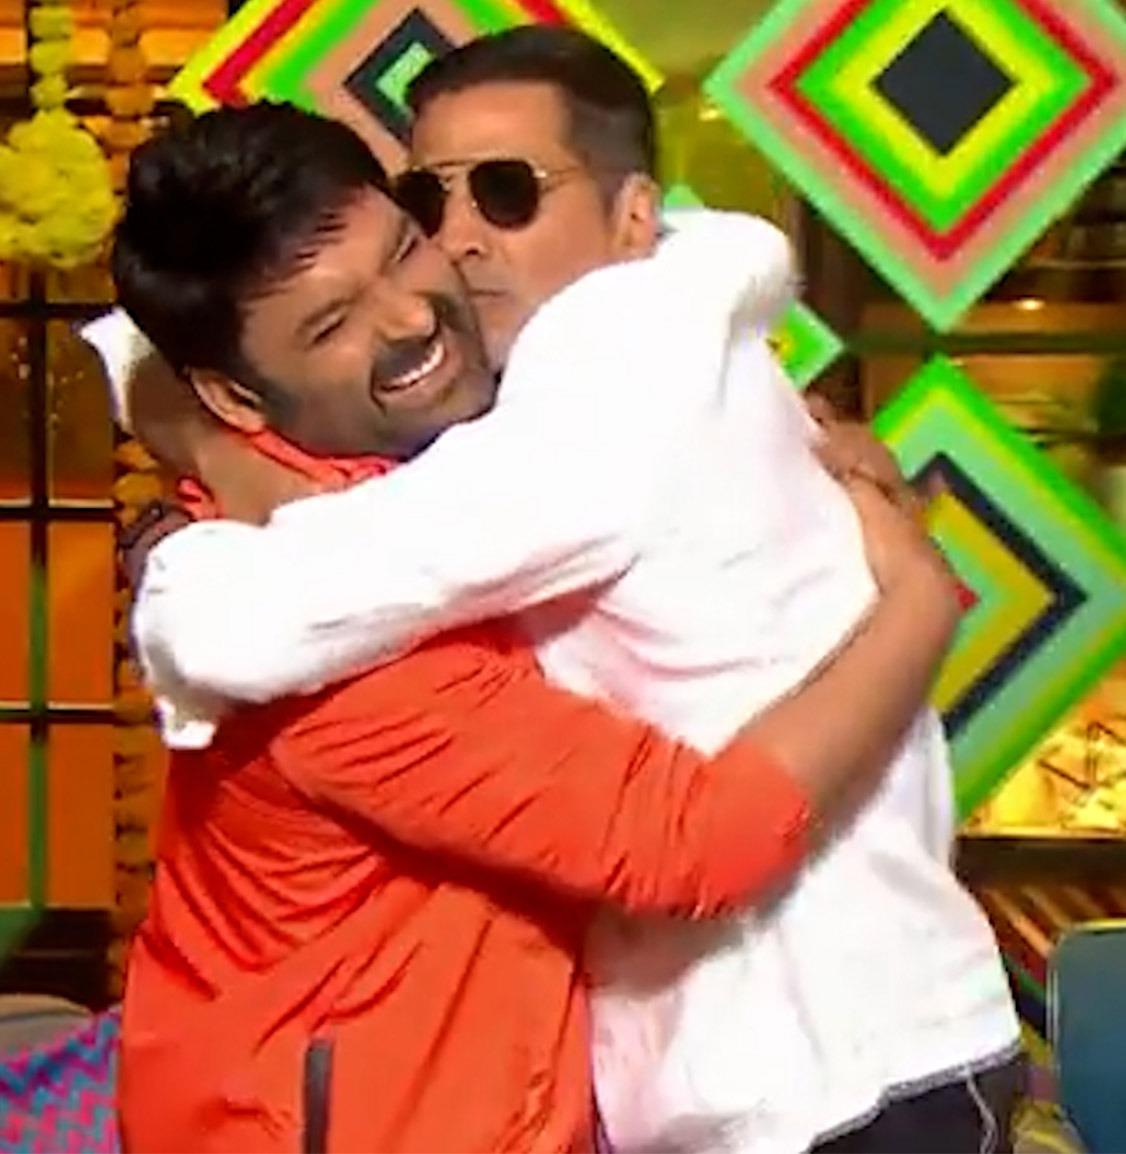 The Kapil Sharma Show: From rumours of rift to Akshay Kumar wishing a happy Holi to the comedian with kisses, the two are really bonding